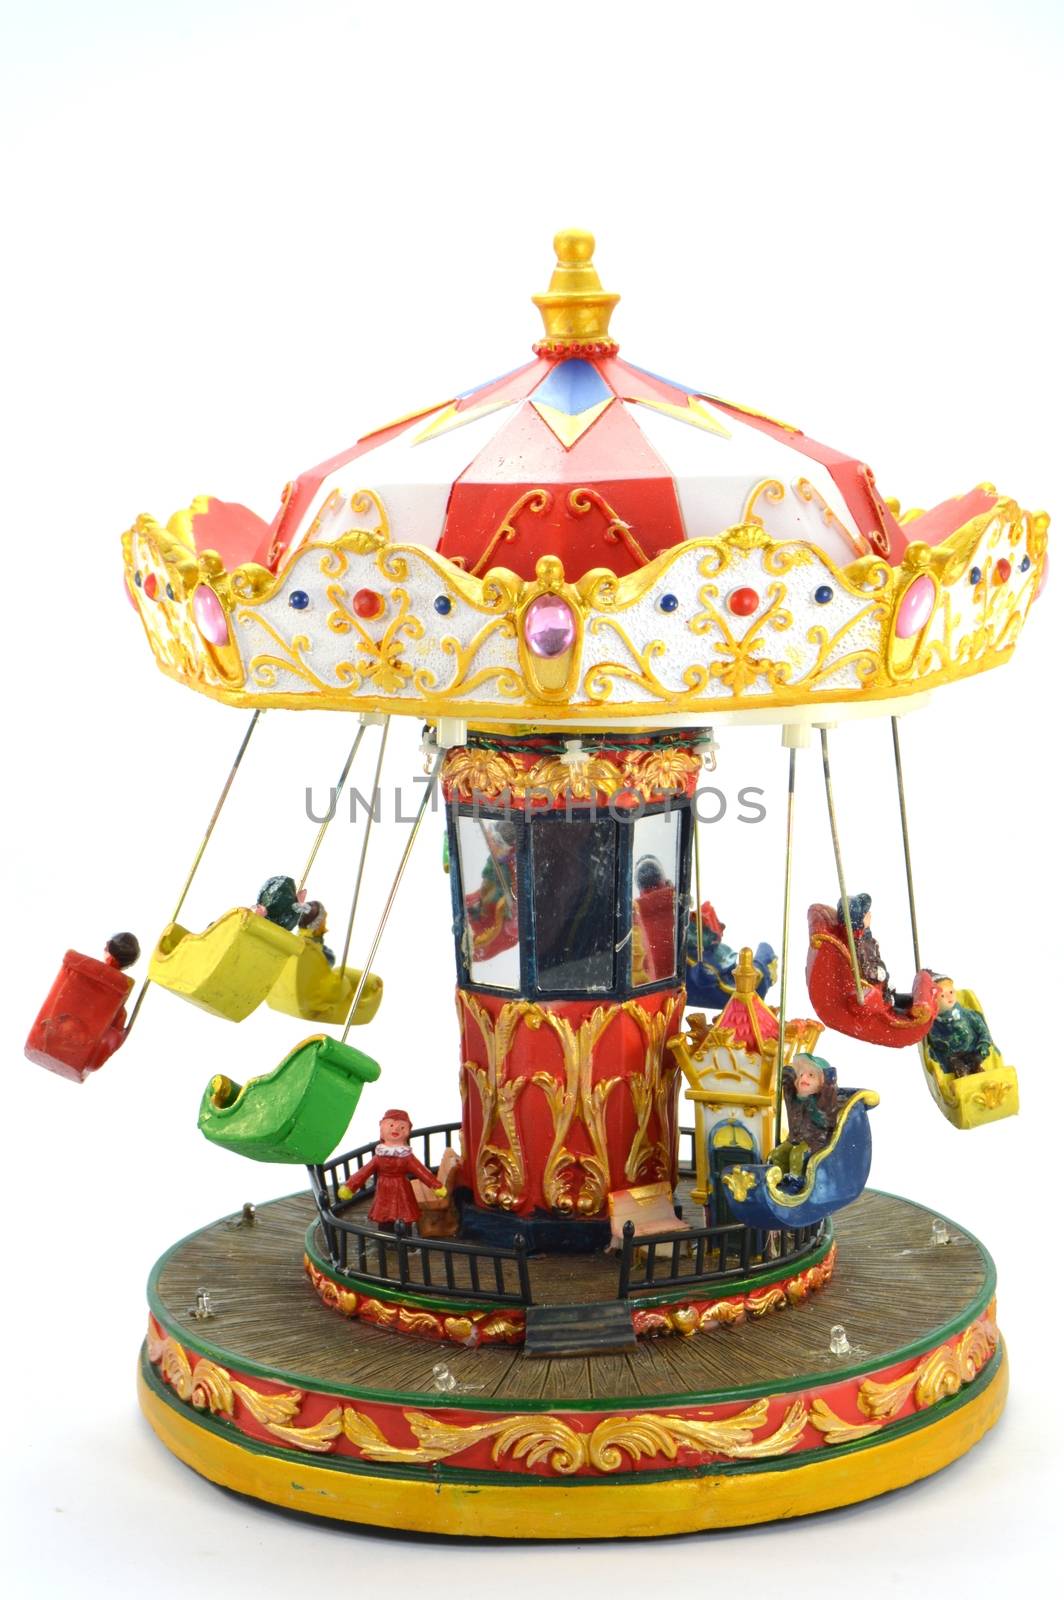 Wooden carousel of Christmas with small seats and lively colors.